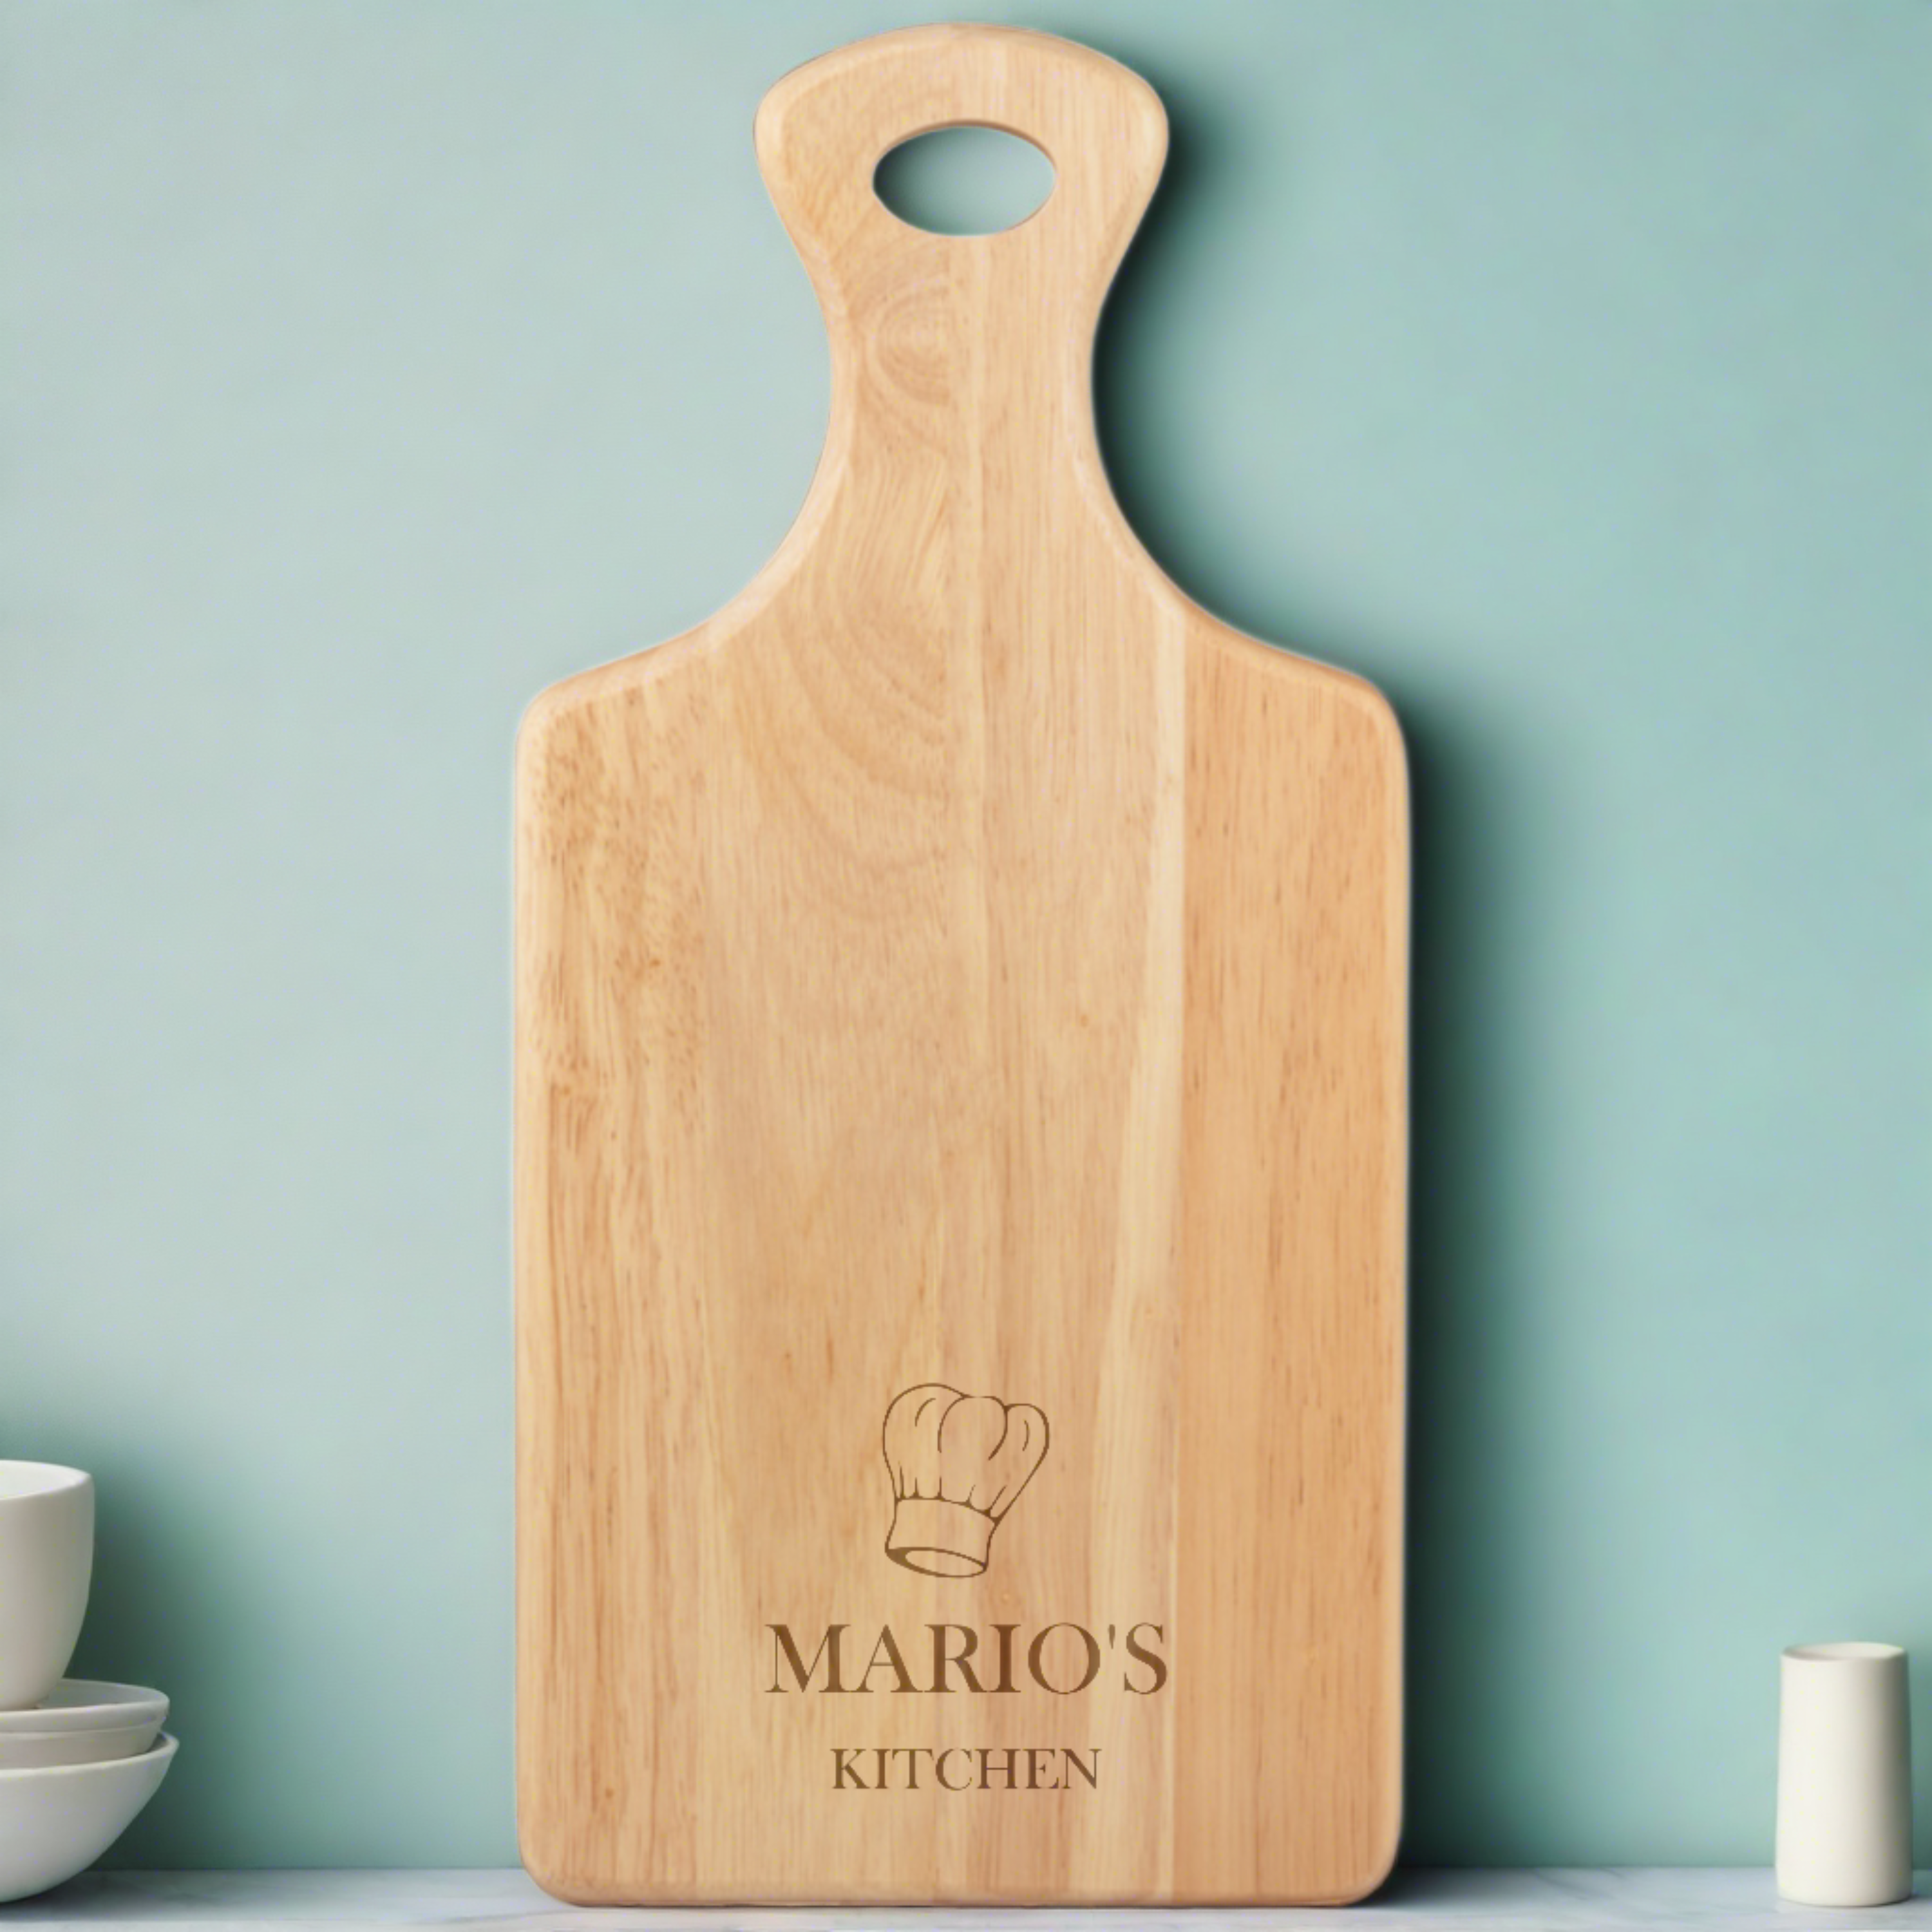 Customisable Serving Board for Housewarmings, Birthdays, and Weddings